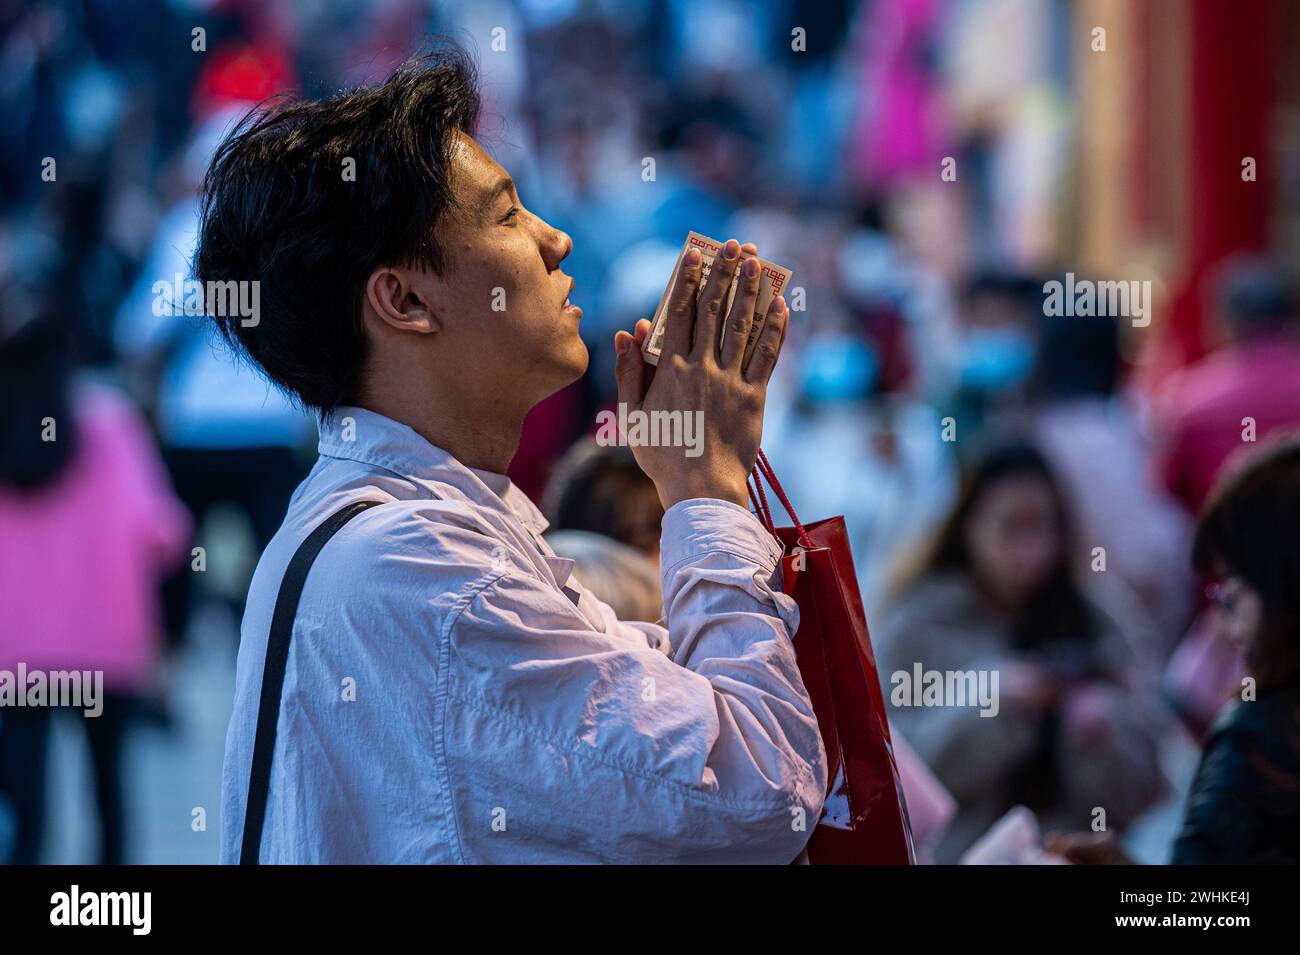 A worshipper starts the Year of the Dragon by offering prayers at the Wong Tai Sin Temple. The Sik Sik Yuen Wong Tai Sin Temple is one of the largest Taoist temples in Hong Kong and many people come here to offer the first joss sticks of the new year along with prayers for happiness and health. Stock Photo